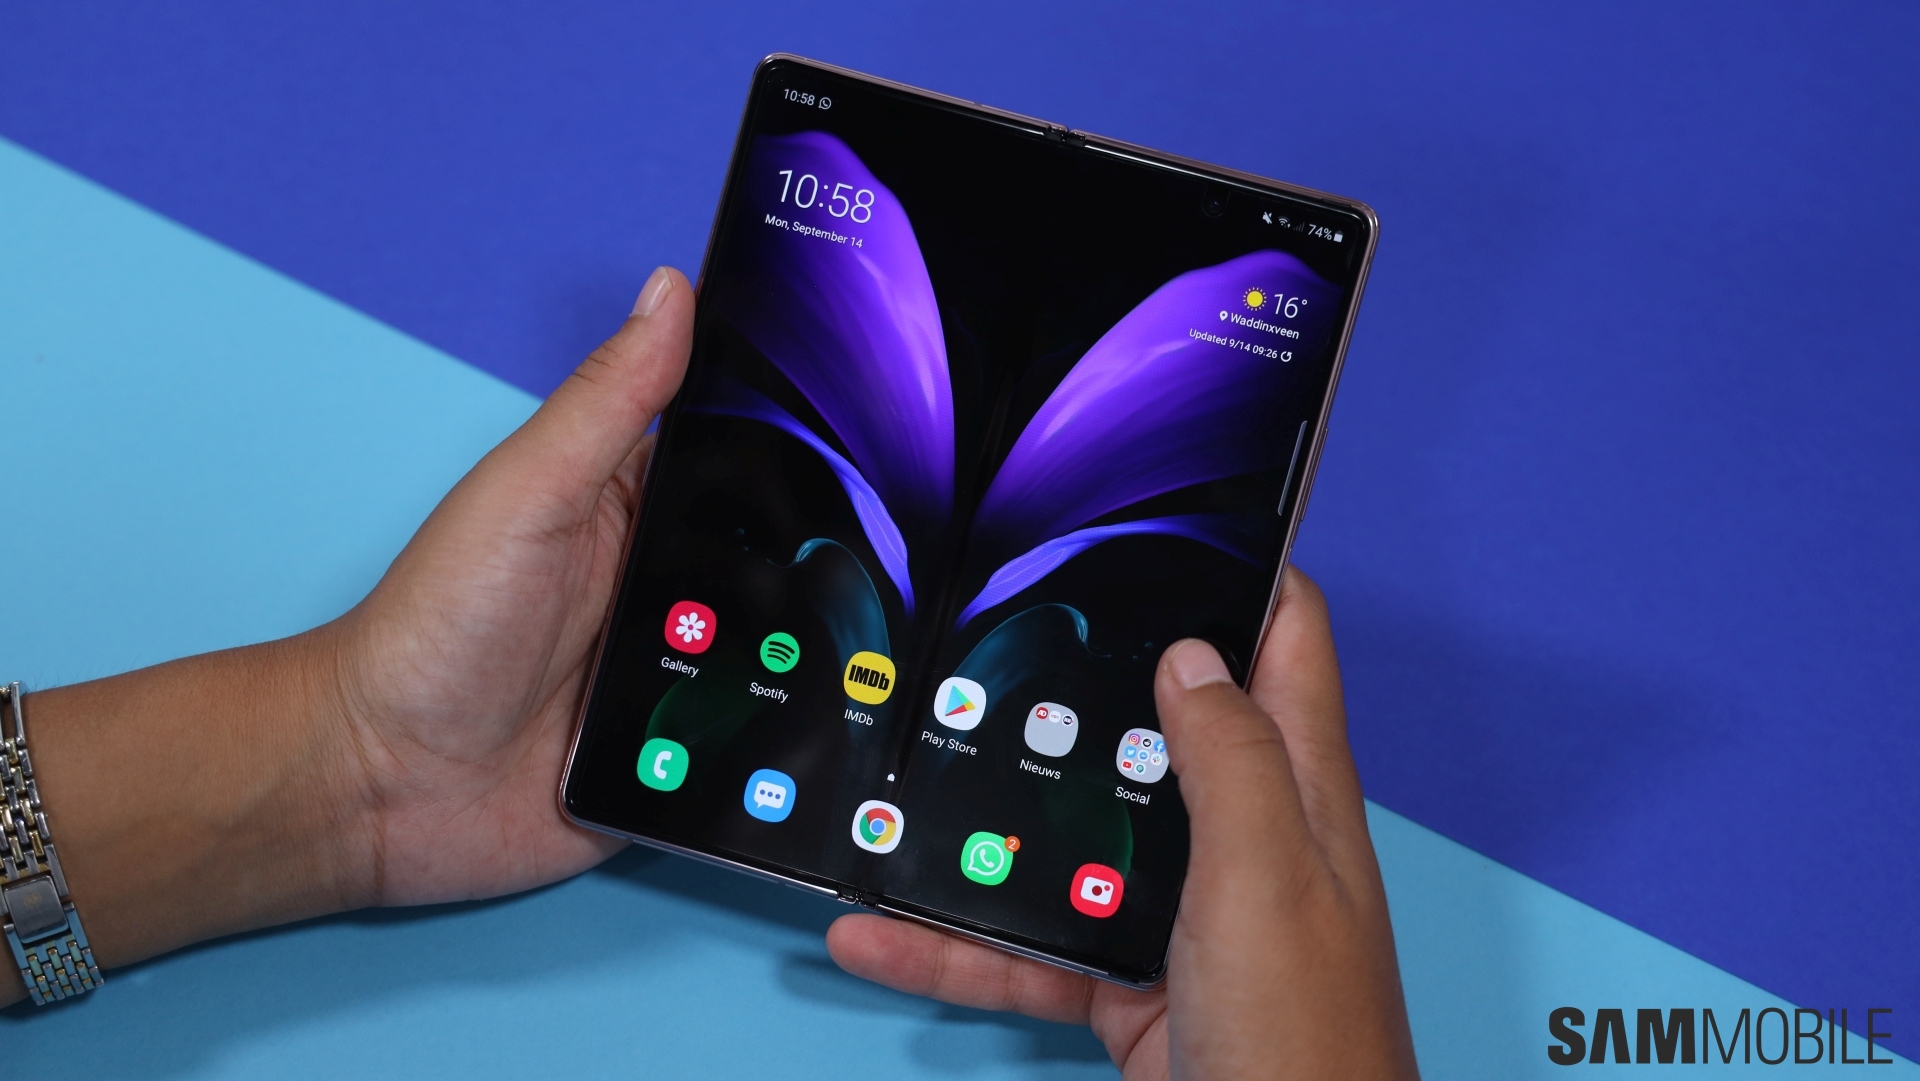 Samsung S Ambitious Targets For The Galaxy Z Fold 3 And Z Flip 3 Revealed Sammobile